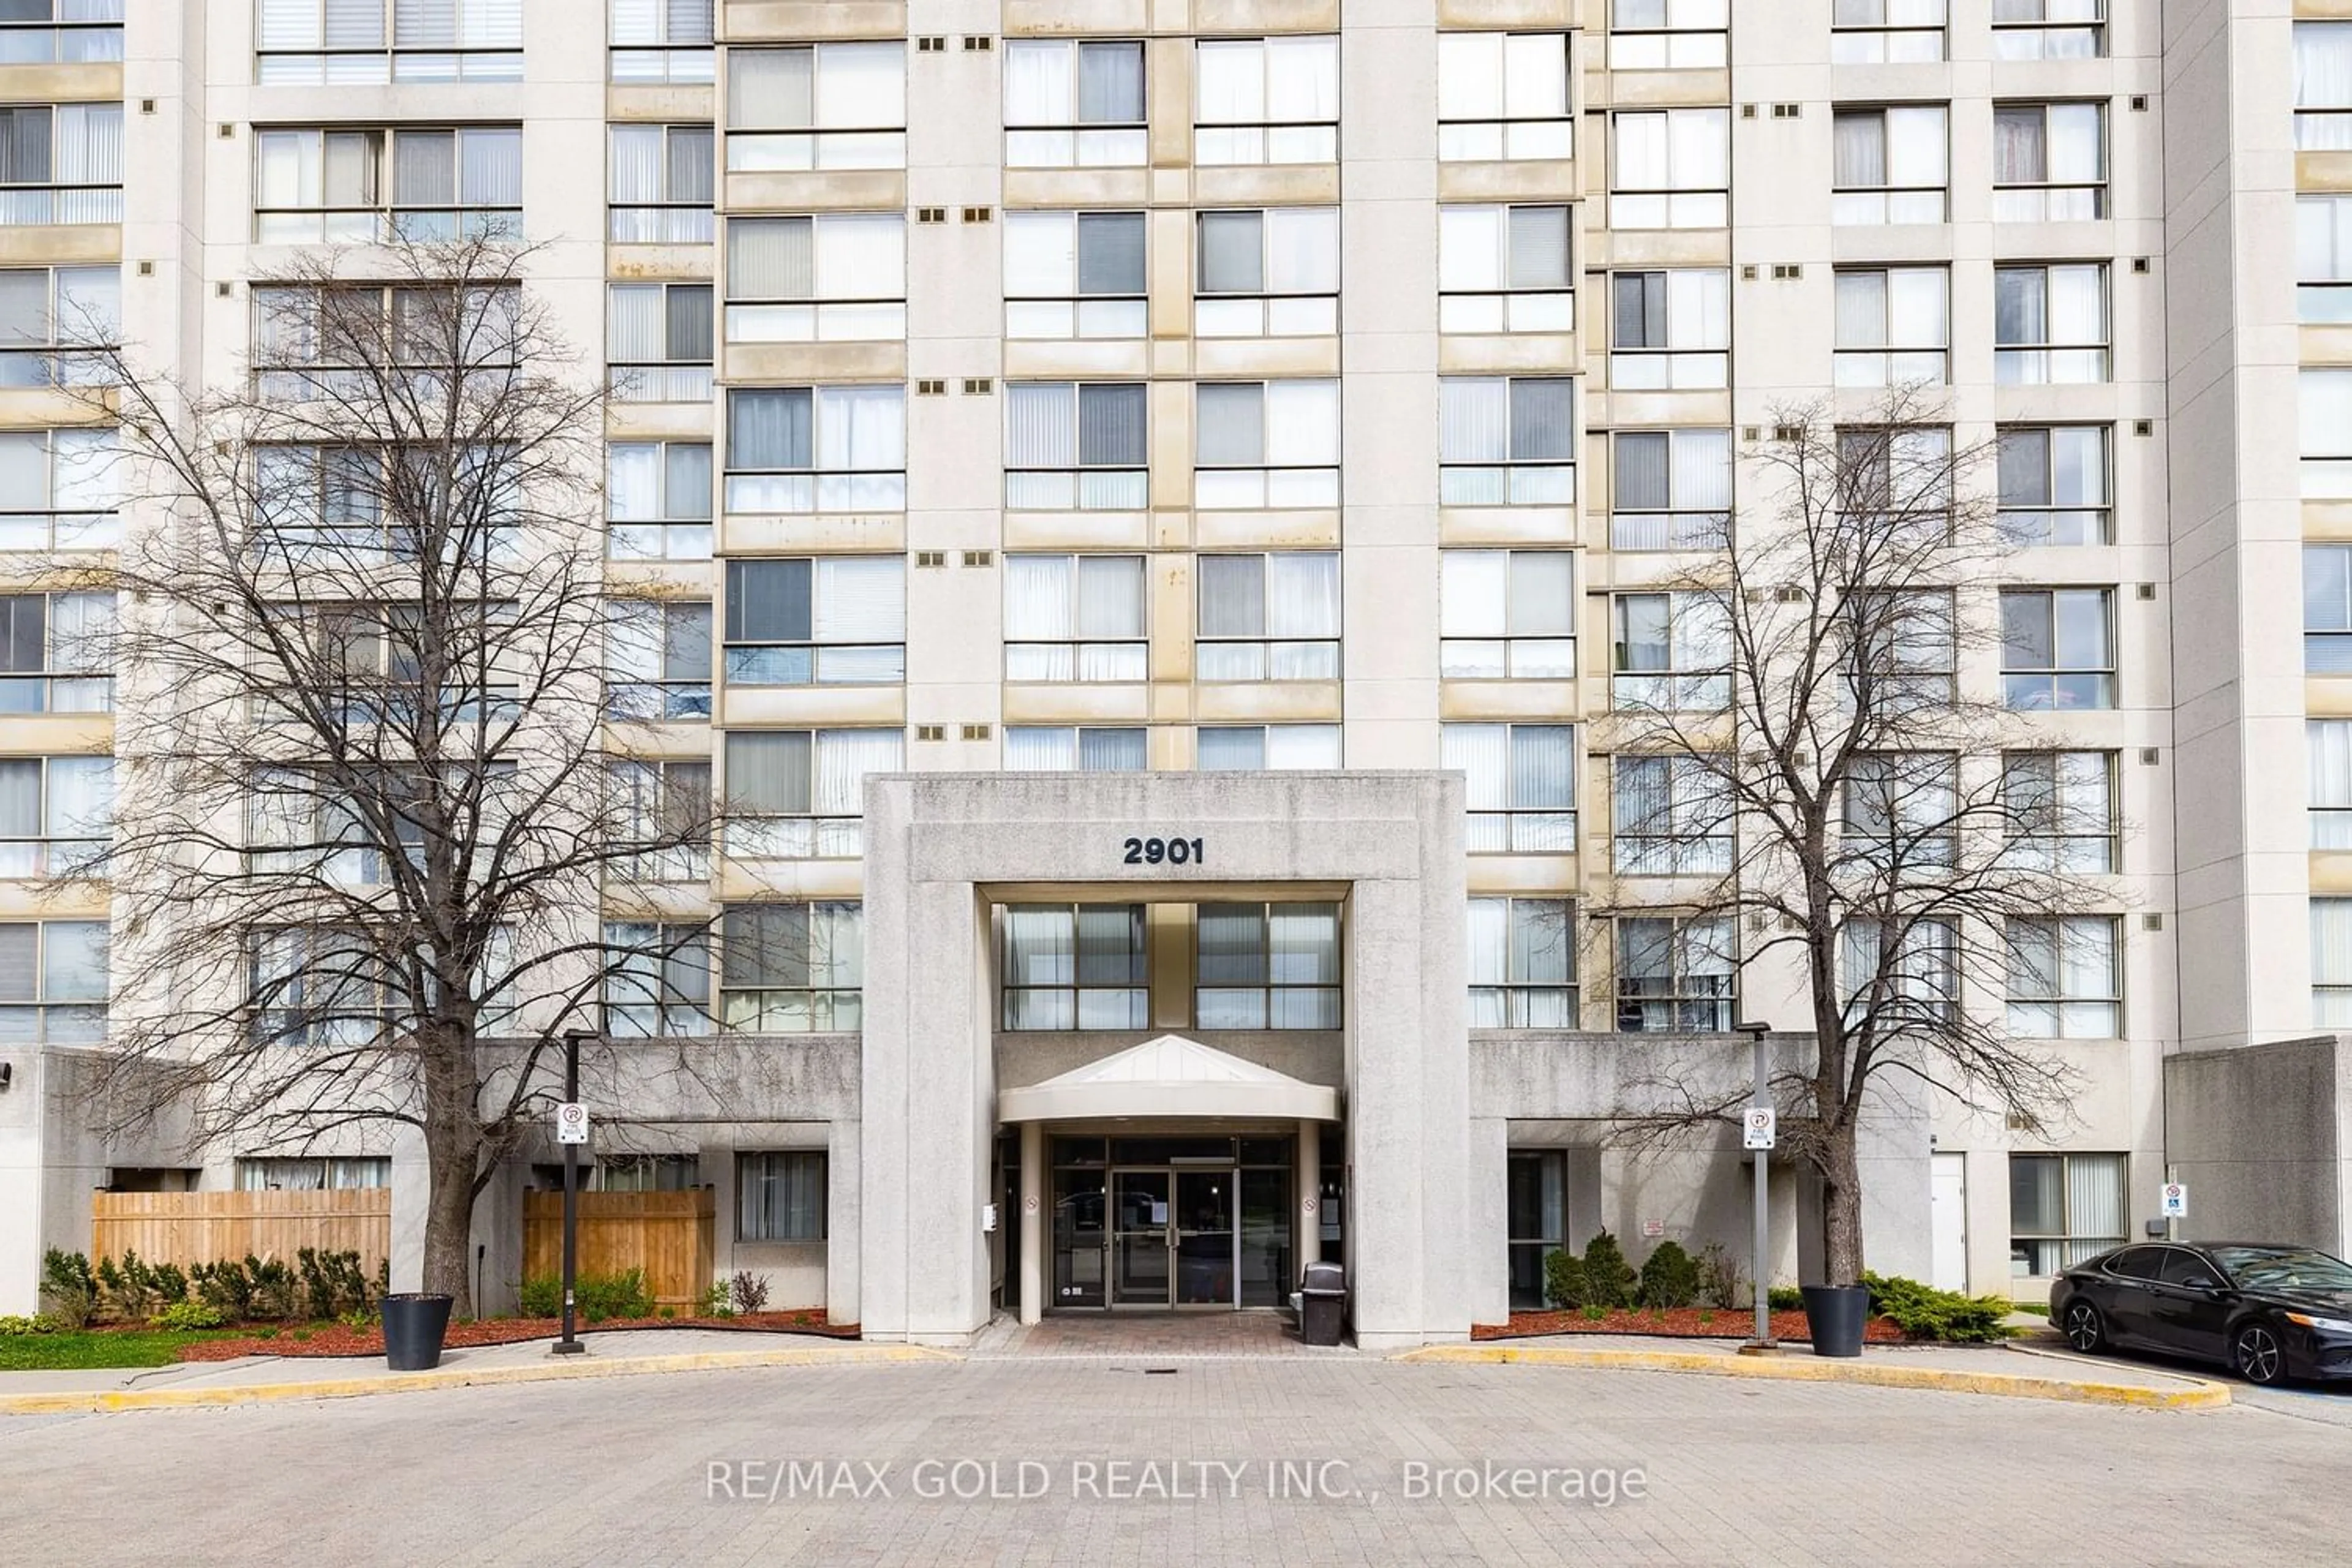 A pic from exterior of the house or condo for 2901 Kipling Ave #1401, Toronto Ontario M9V 5E5